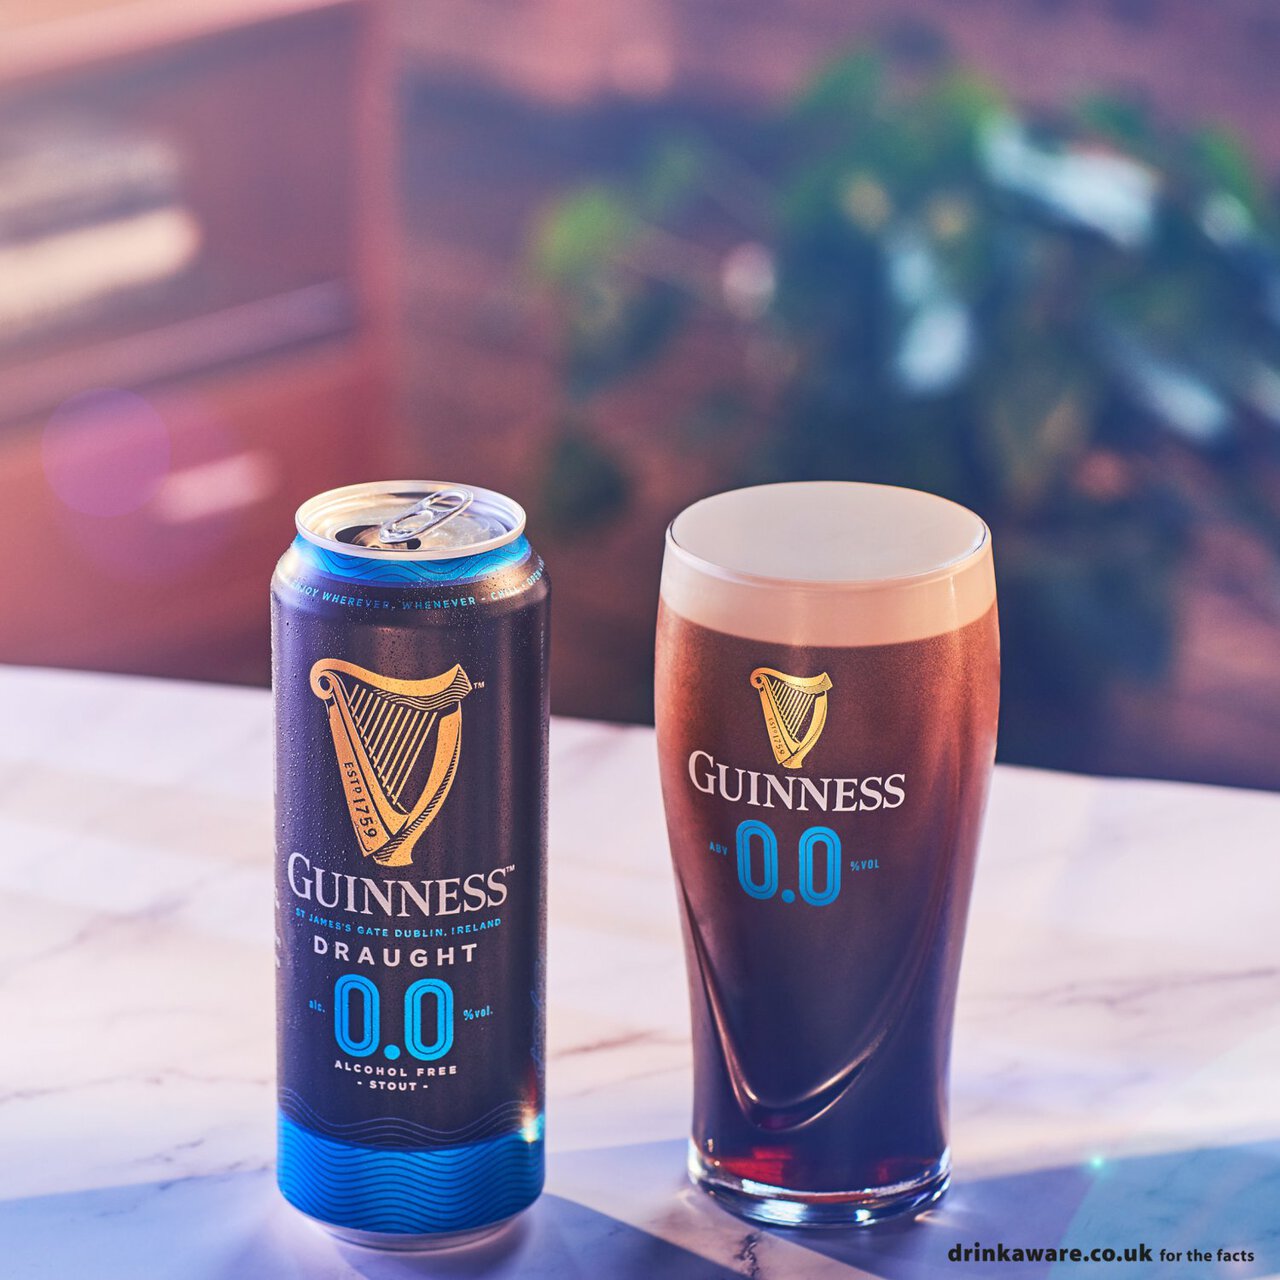 Guinness Draught Alcohol Free Stout Beer 4 x 440ml